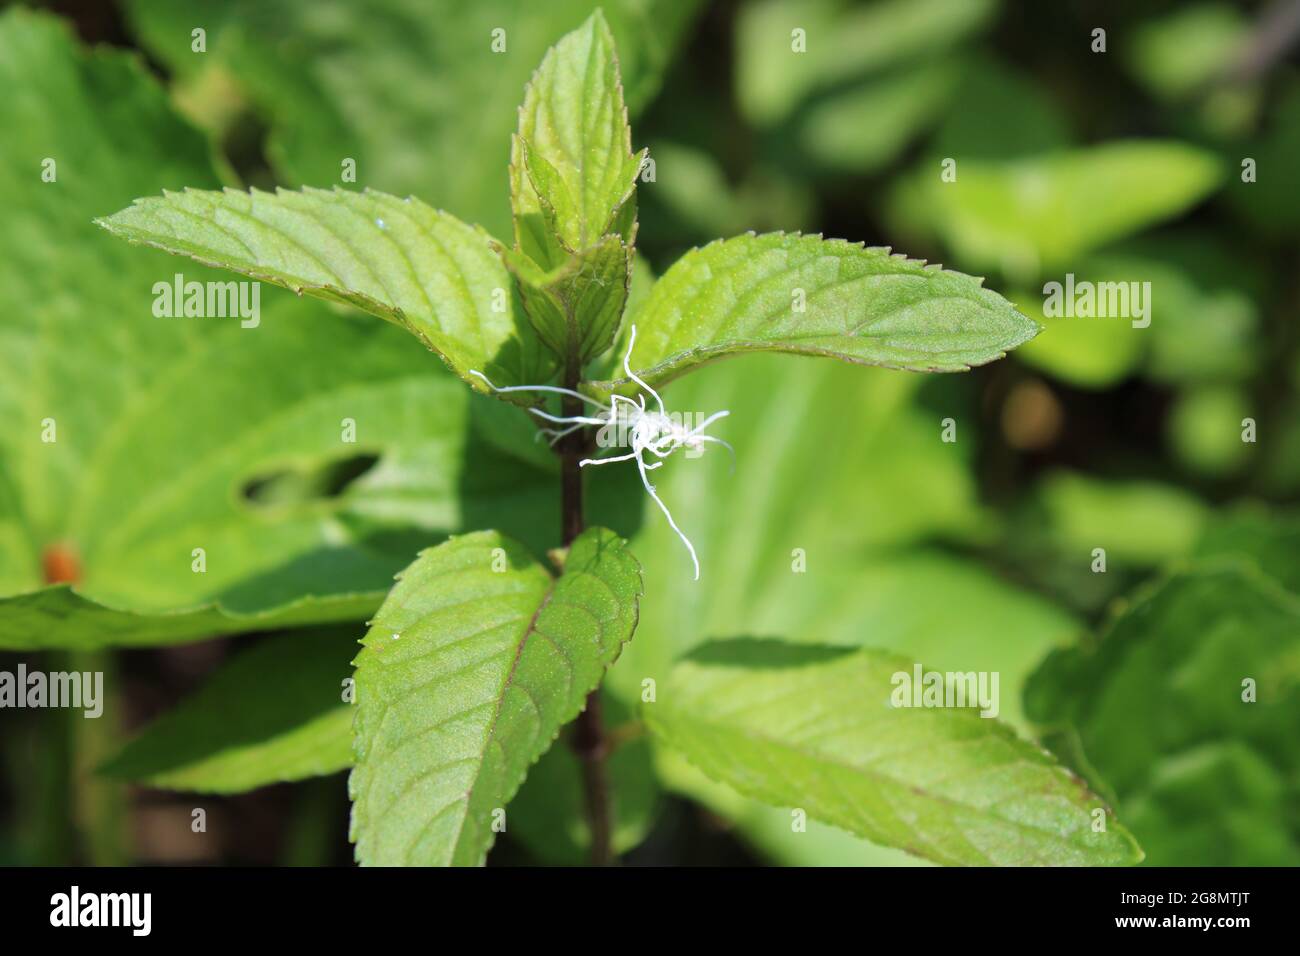 A Mealybug On a Peppermint Plant Stock Photo